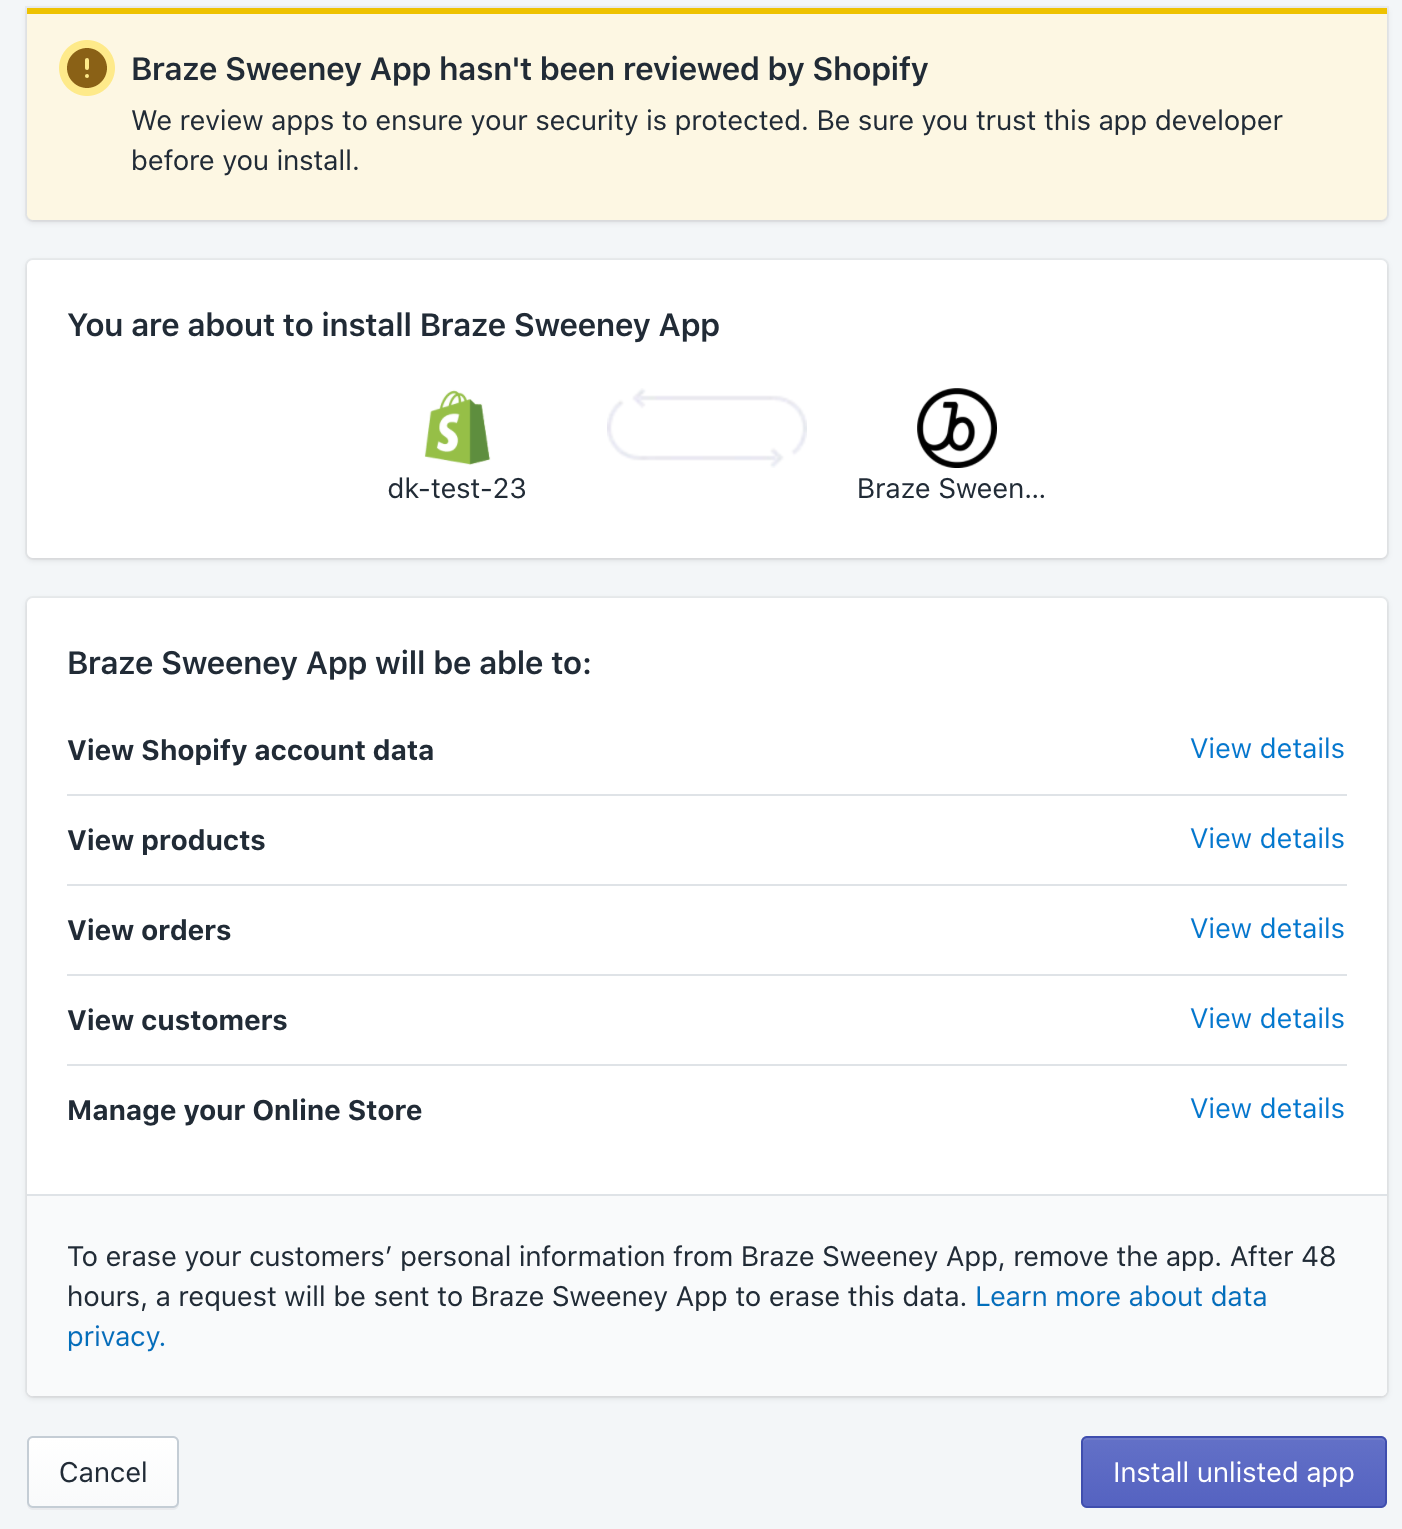 Shopify app installation page, which lists the permissions the Braze app will have after installing.